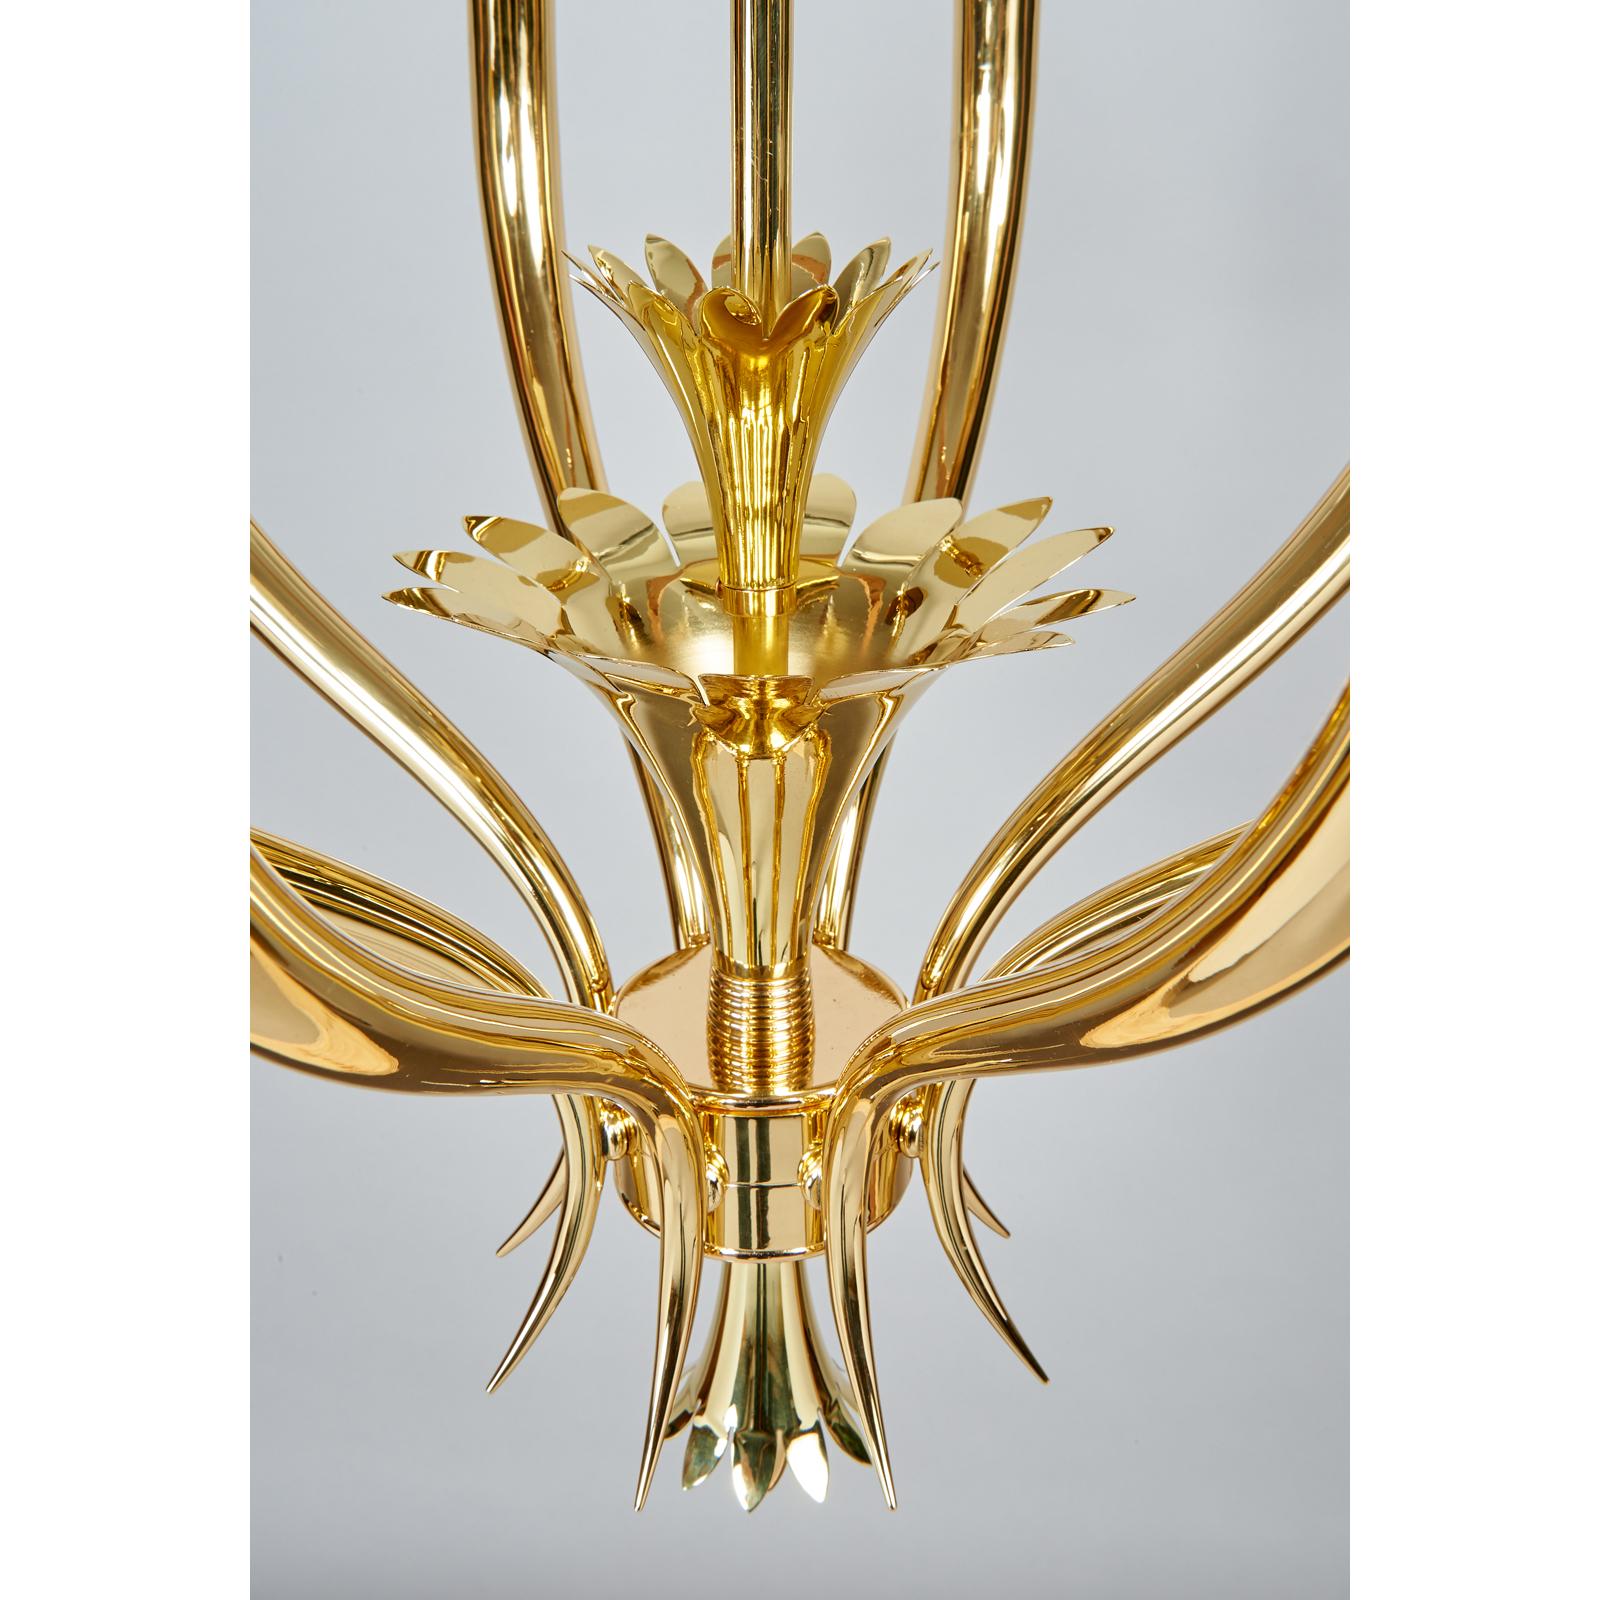 Gio Ponti: Important Geometric 8-Arm Chandelier in Polished Brass, Italy 1930s For Sale 5